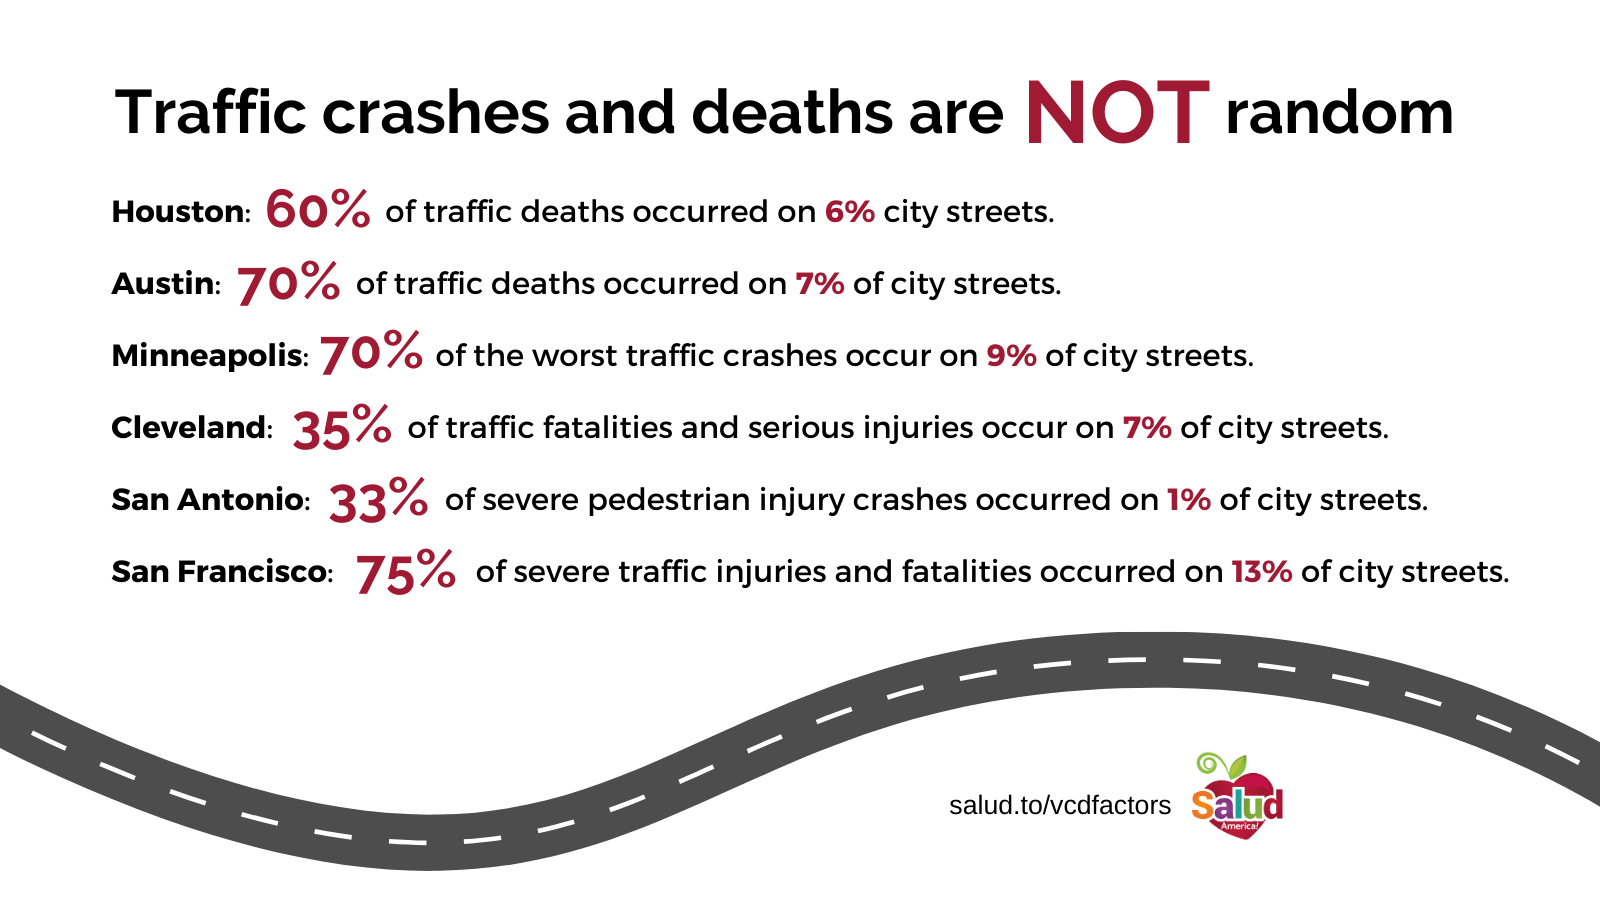 Traffic crashes and deaths are NOT random